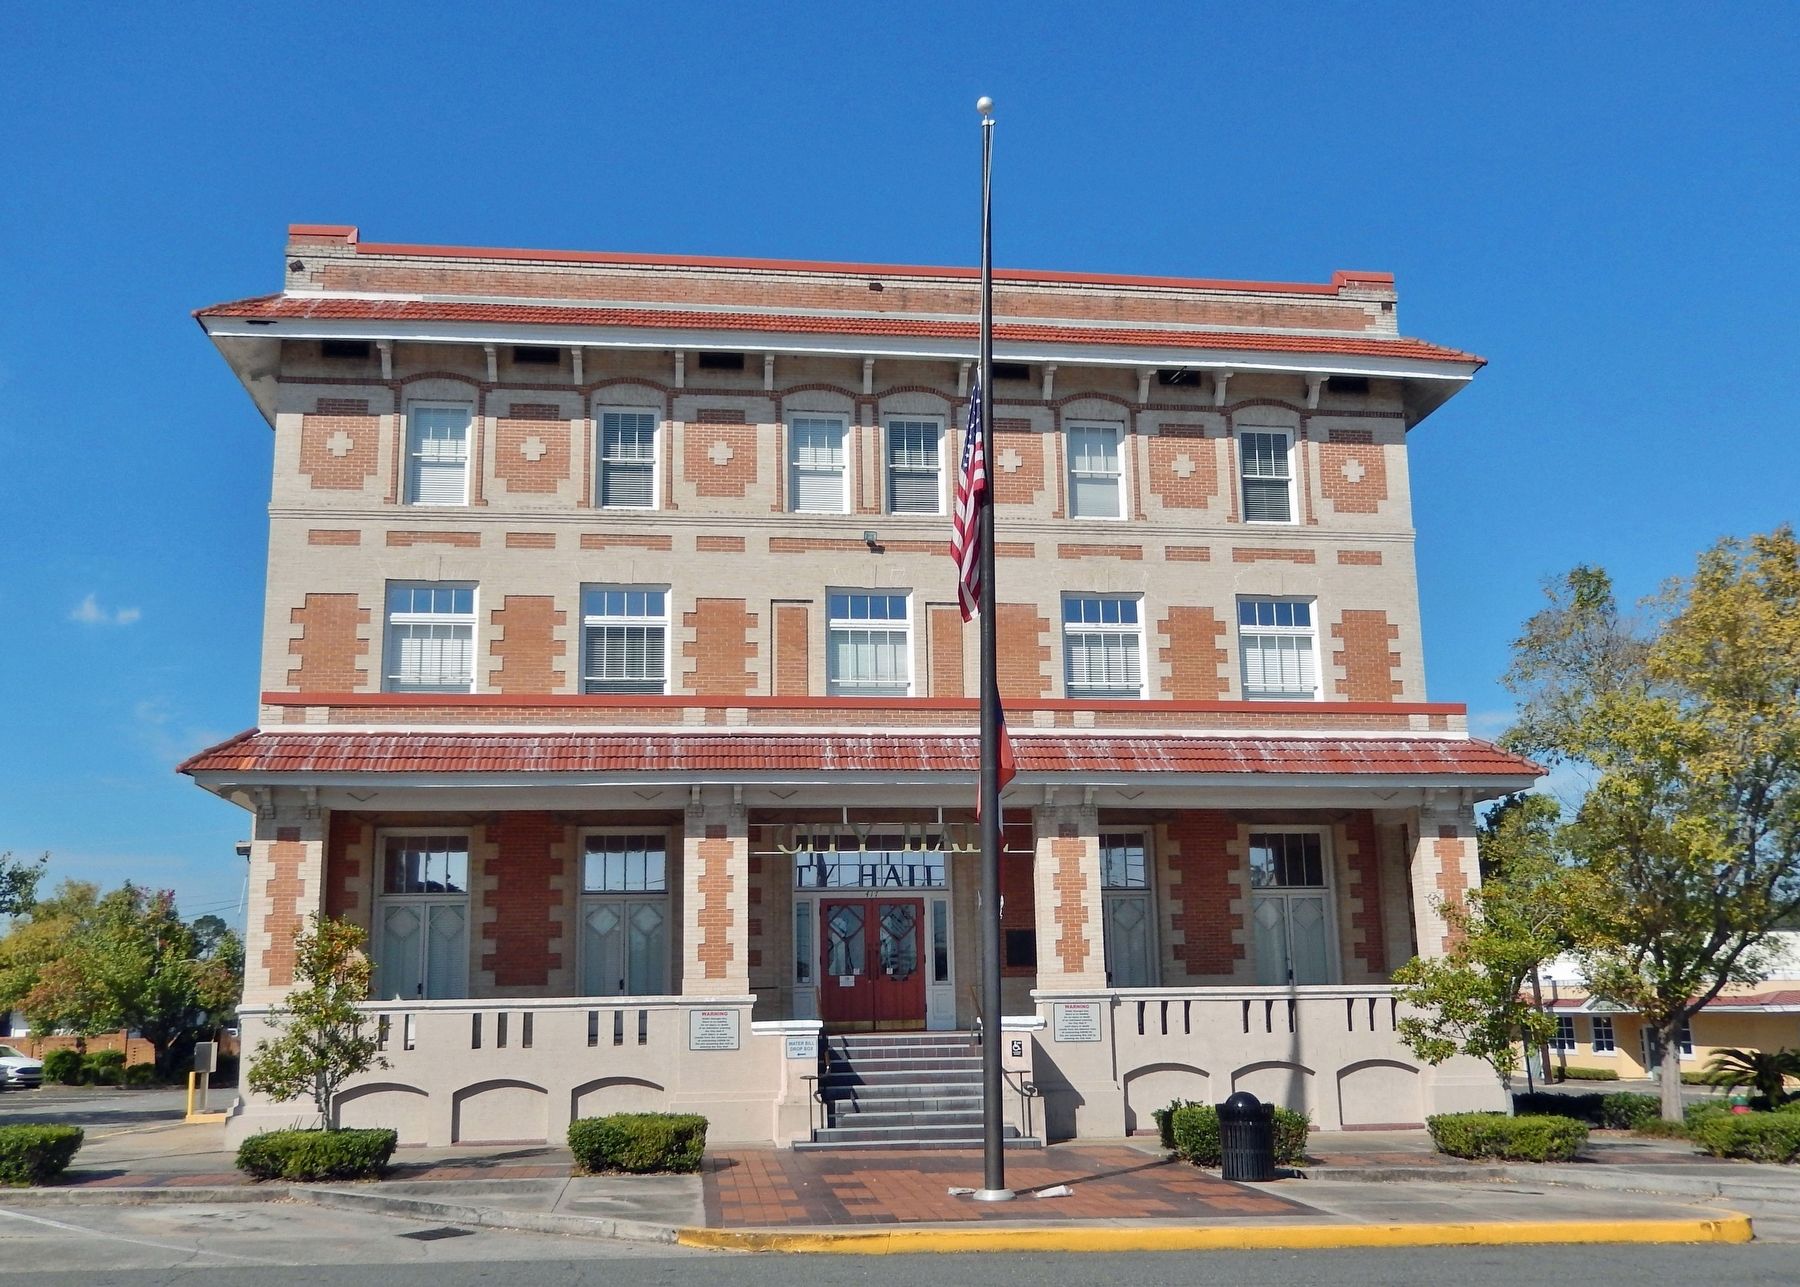 Waycross City Hall (<i>east/front elevation</i>) image. Click for full size.